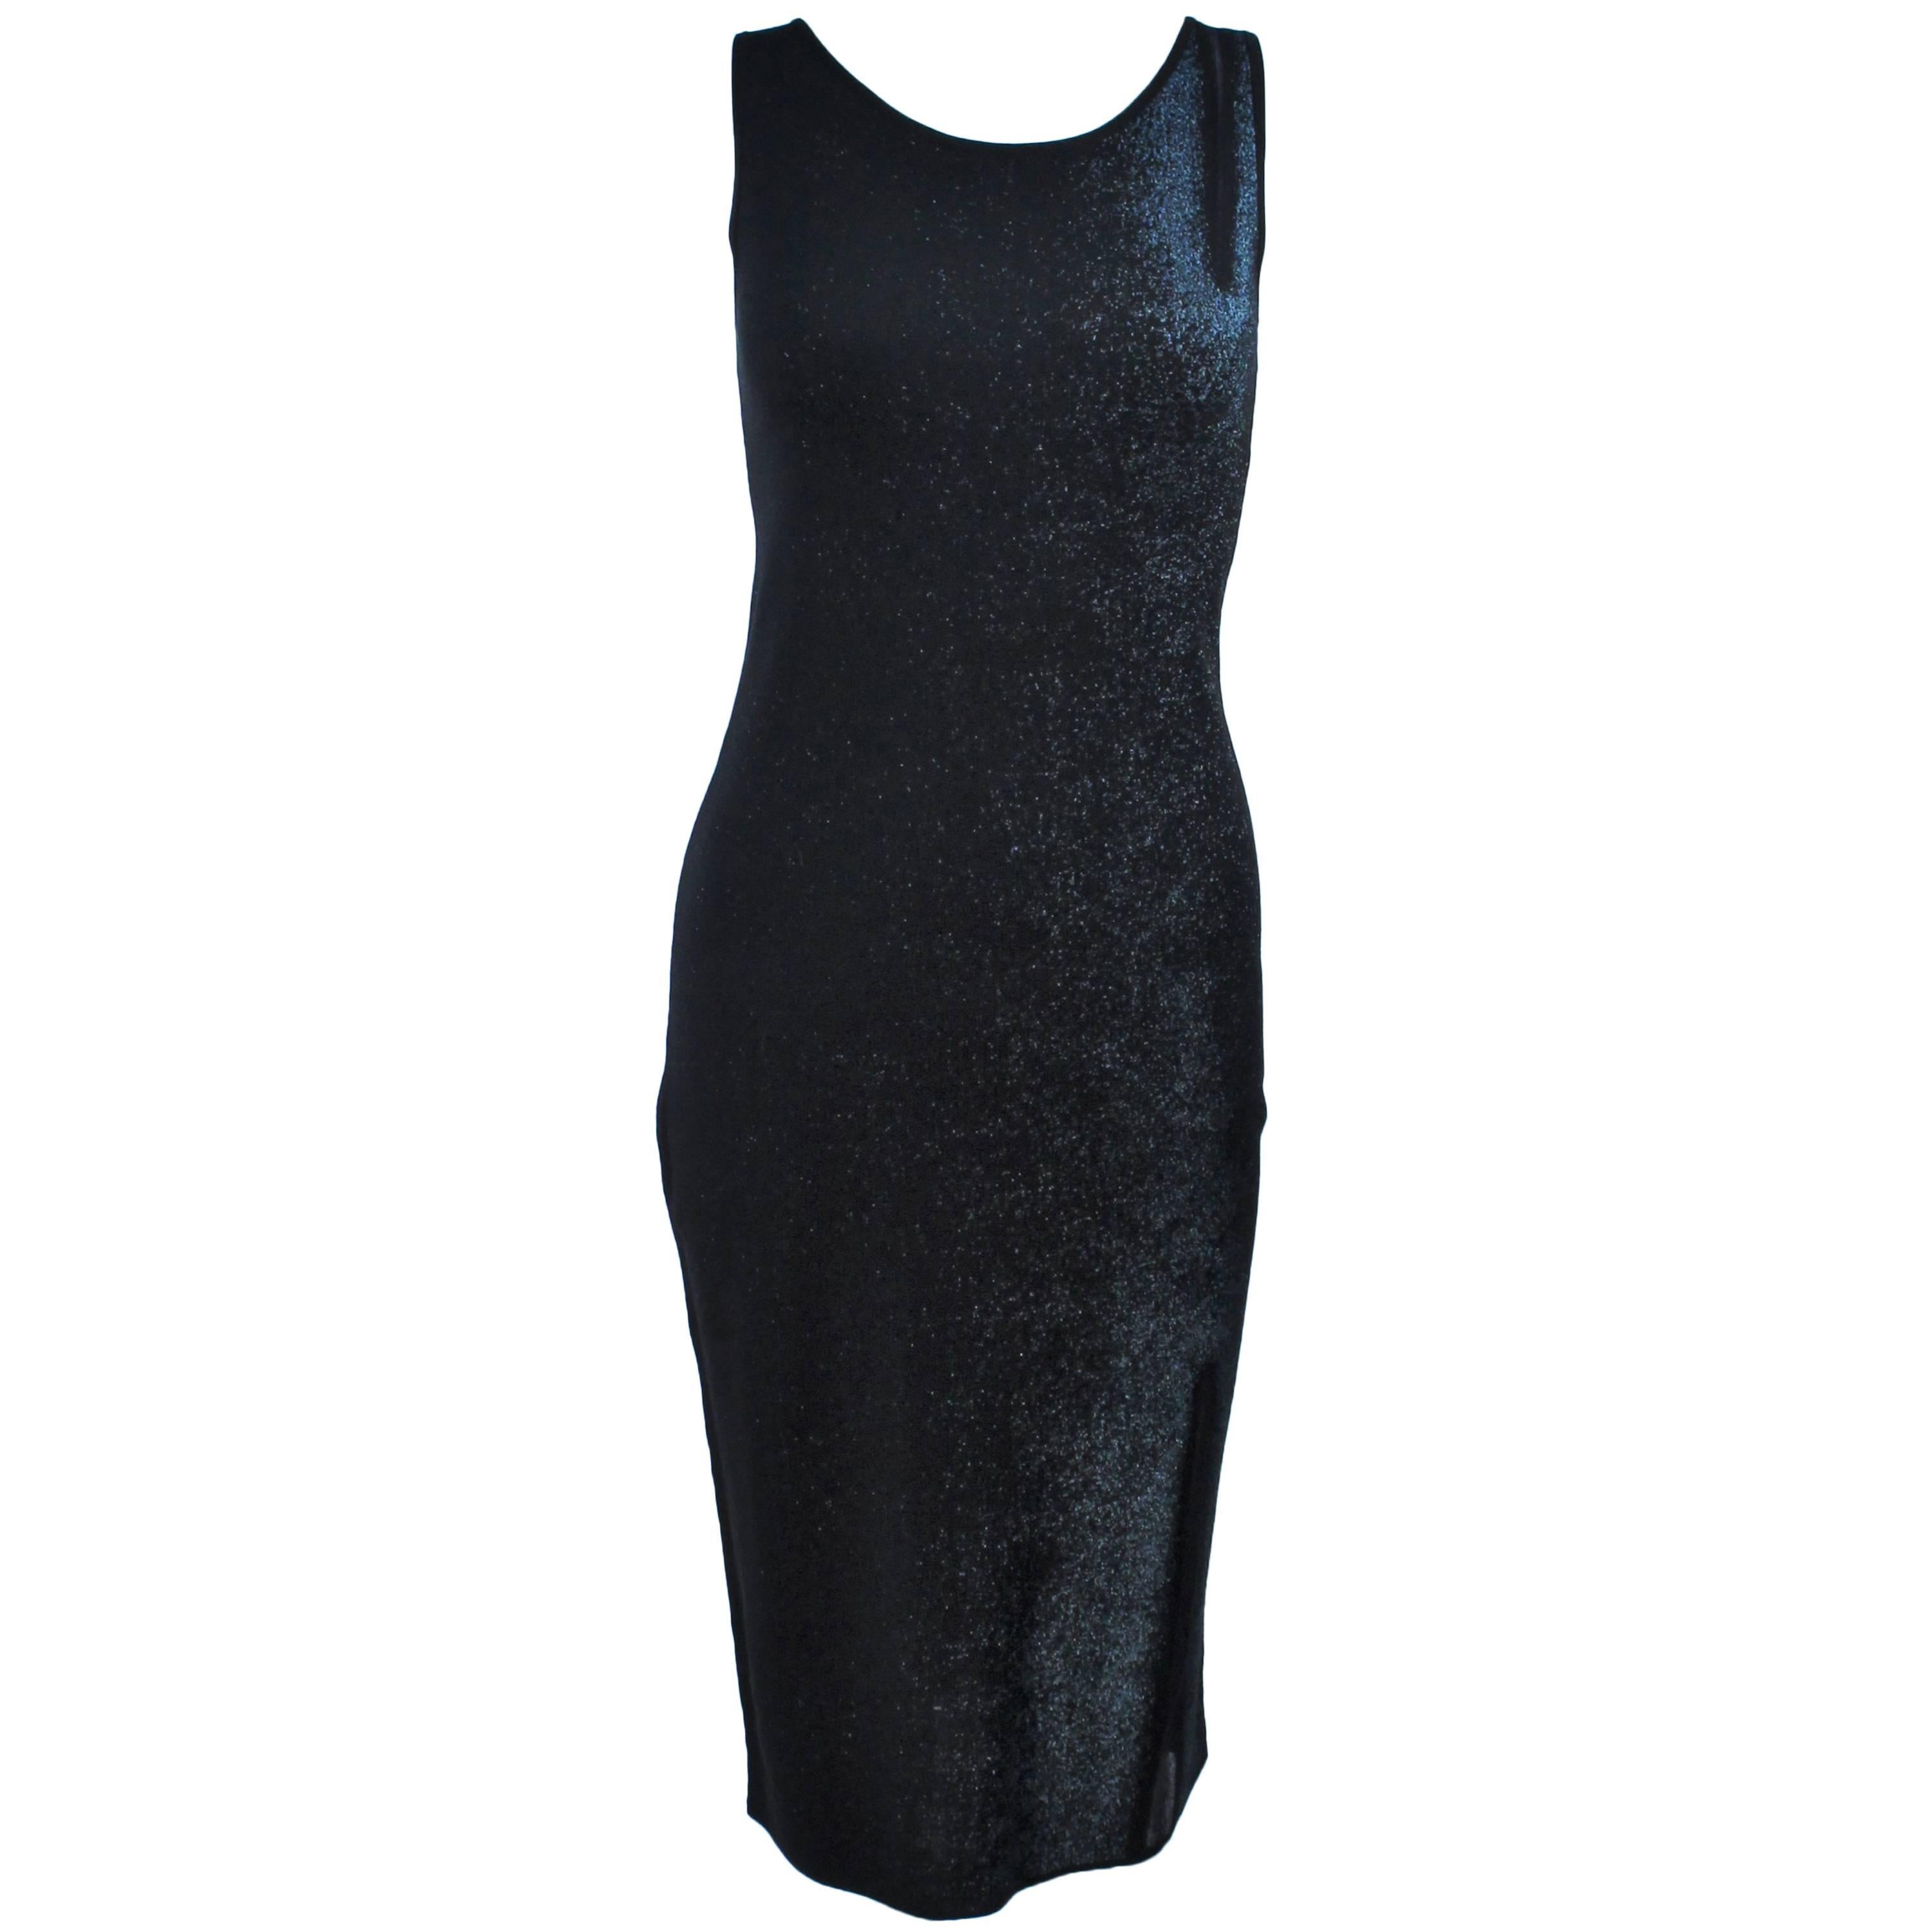 PORTS Black and Navy Metallic Stretch Dress with Sheer Detailing Size XS For Sale